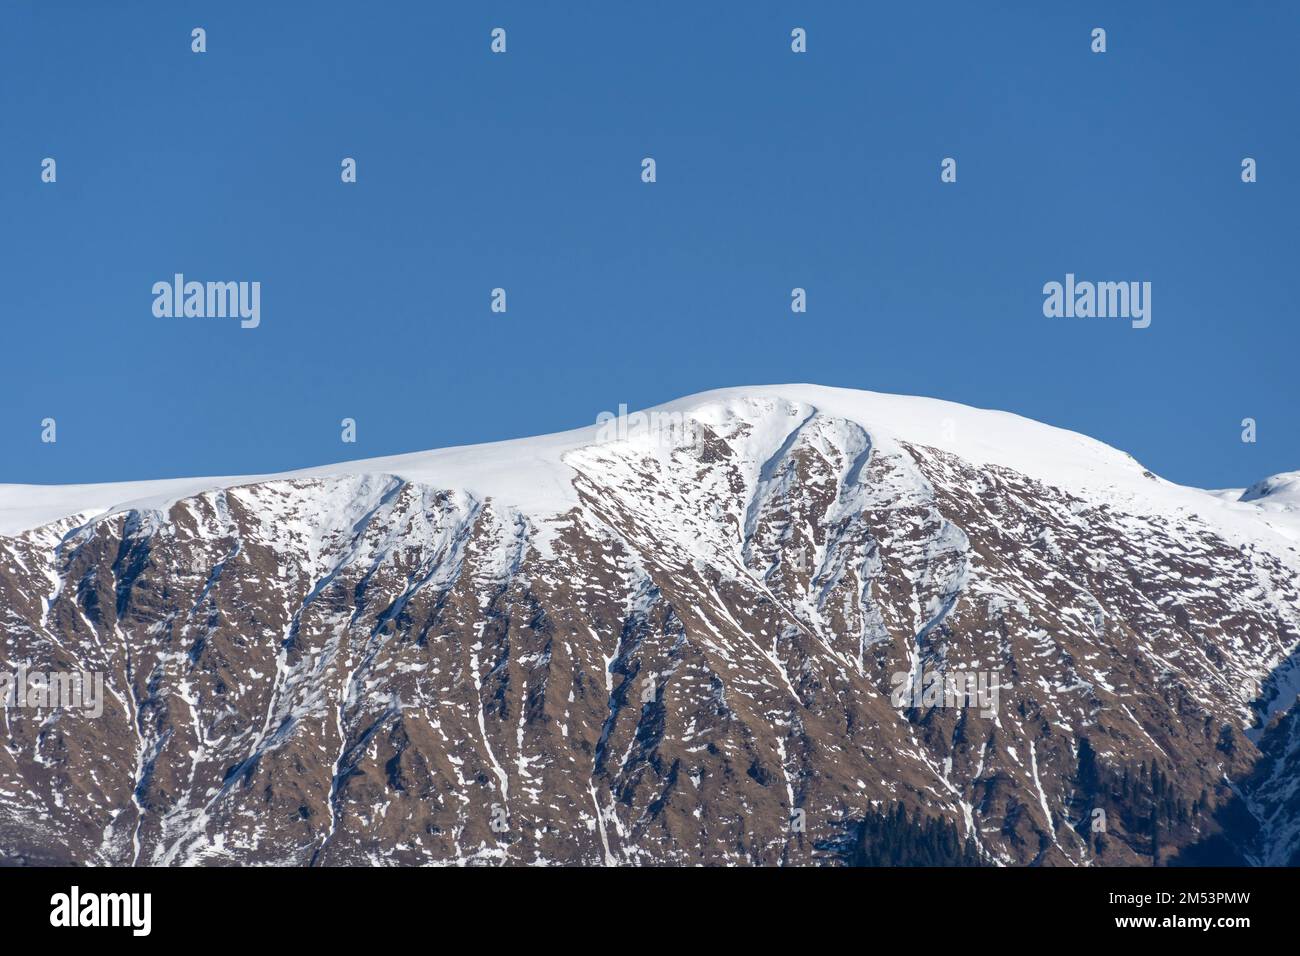 Snow-capped mountain peaks illuminated by the sun in winter Stock Photo